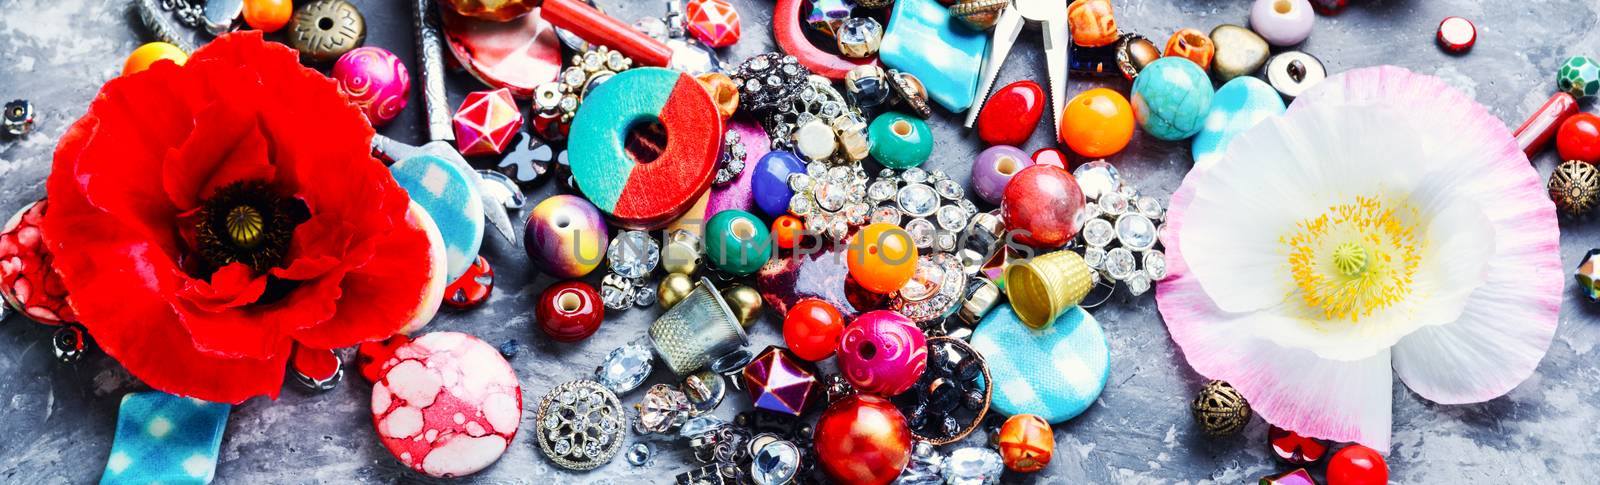 Beads, colorful beads for needlework and poppy.Fashion jewelry